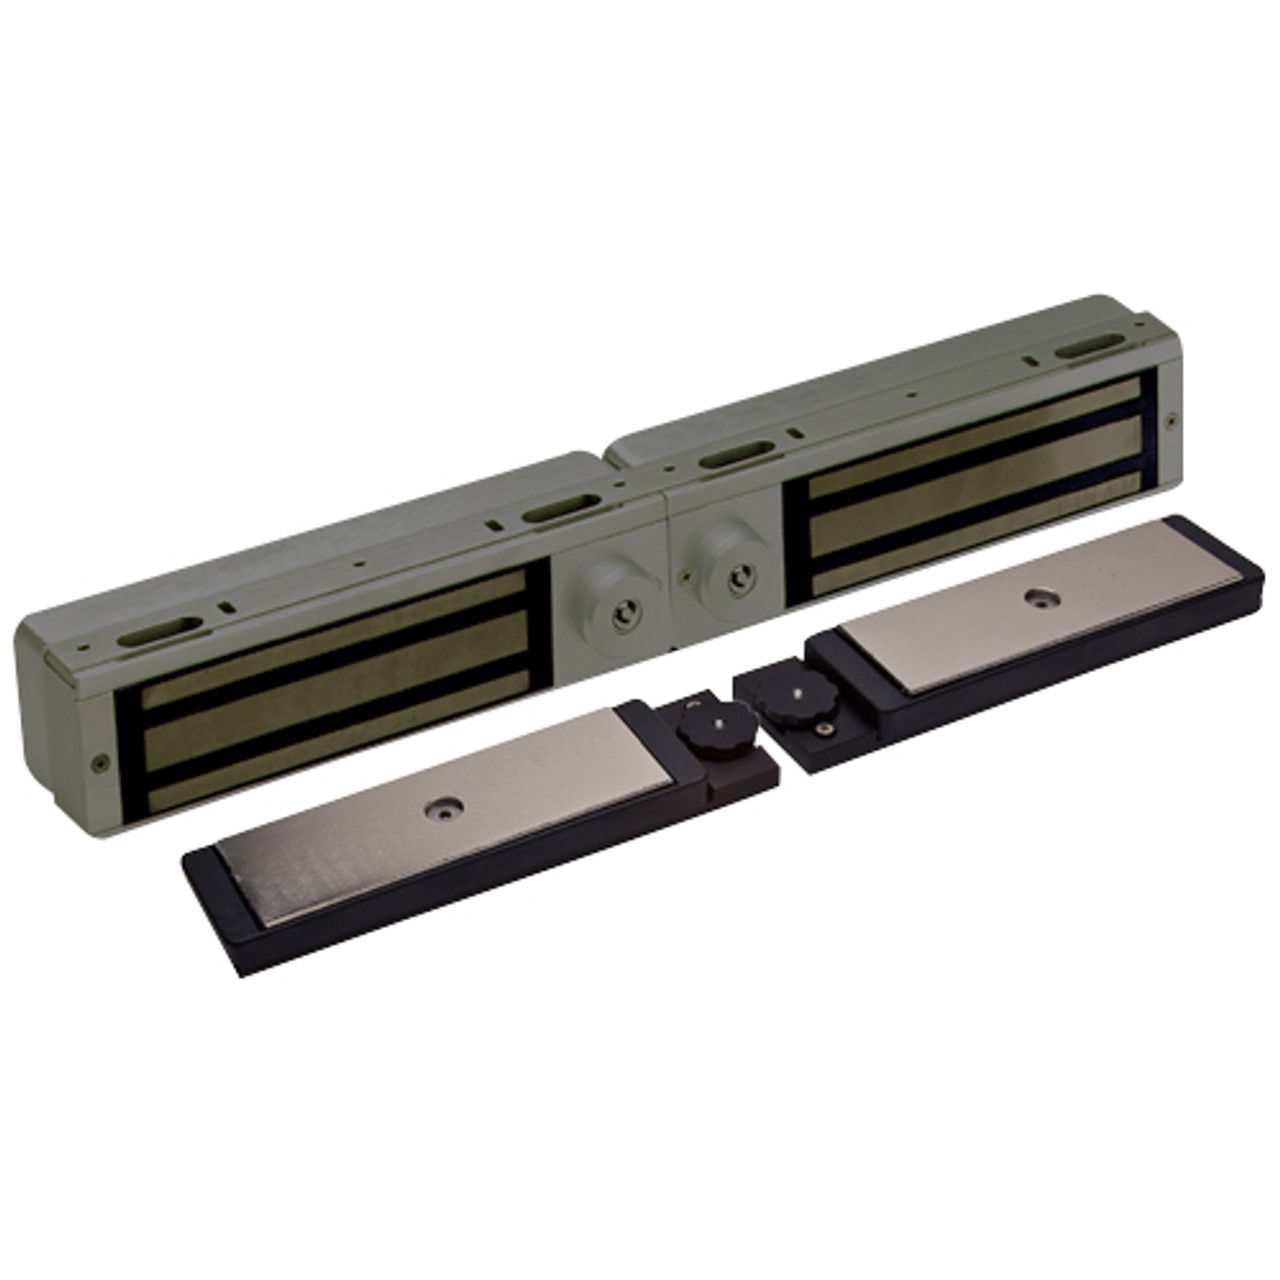 3121C-DSM2-US10B DynaLock 3101C Series Delay Egress Electromagnetic Lock for Double Outswing Door with DSM in Oil Rubbed Bronze